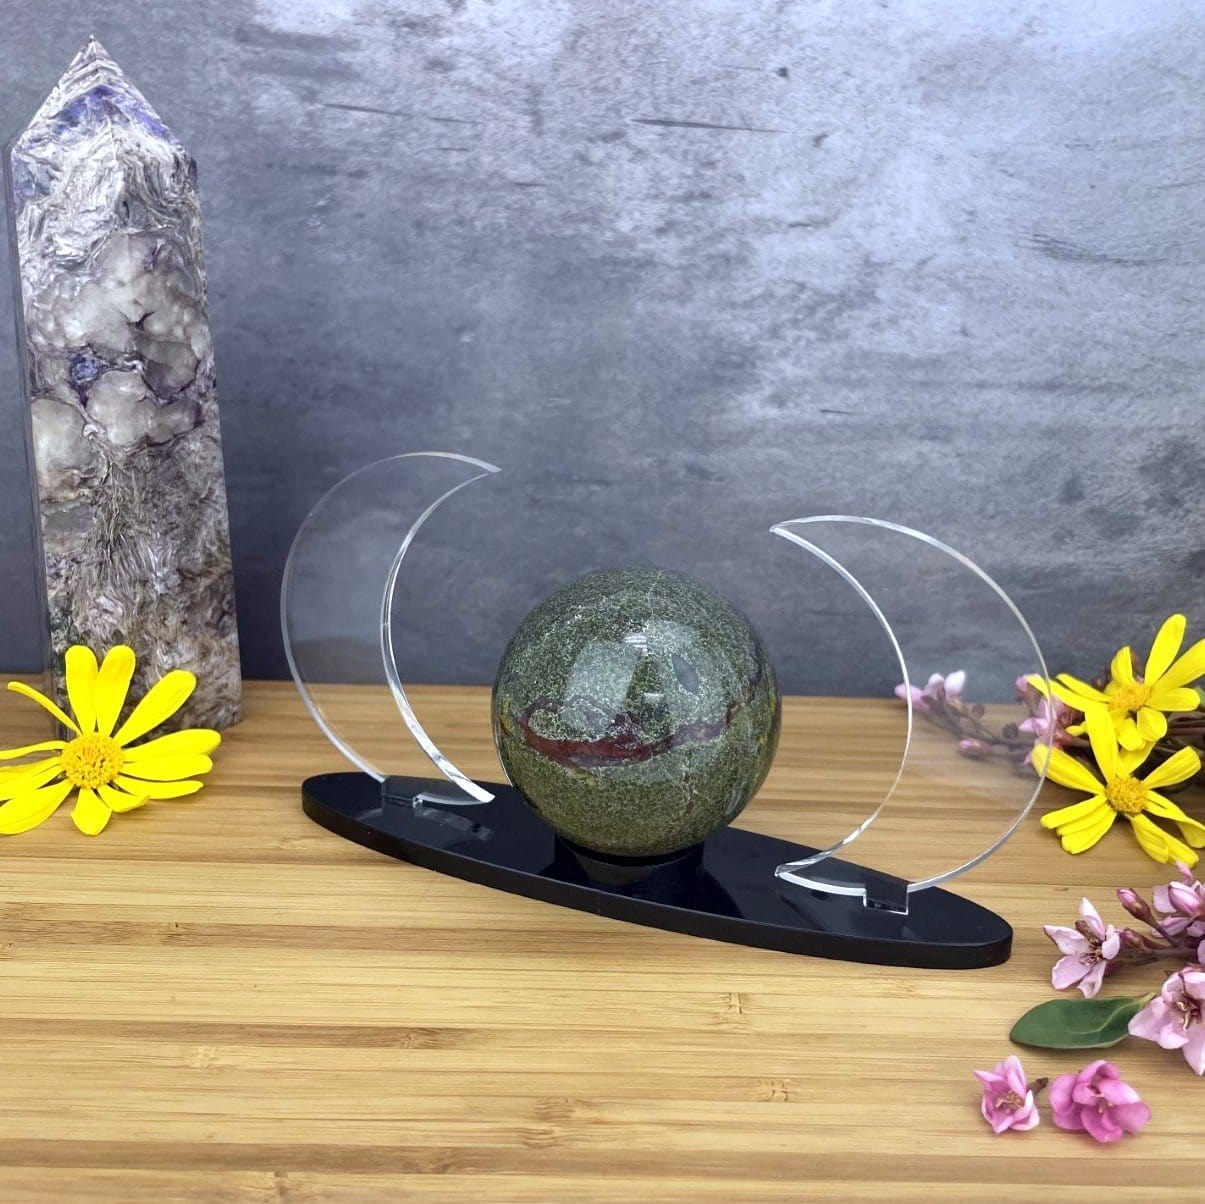 An angled Acrylic Sphere Holder Crescent Moons shown holding a sphere in an alter surrounded by flowers.